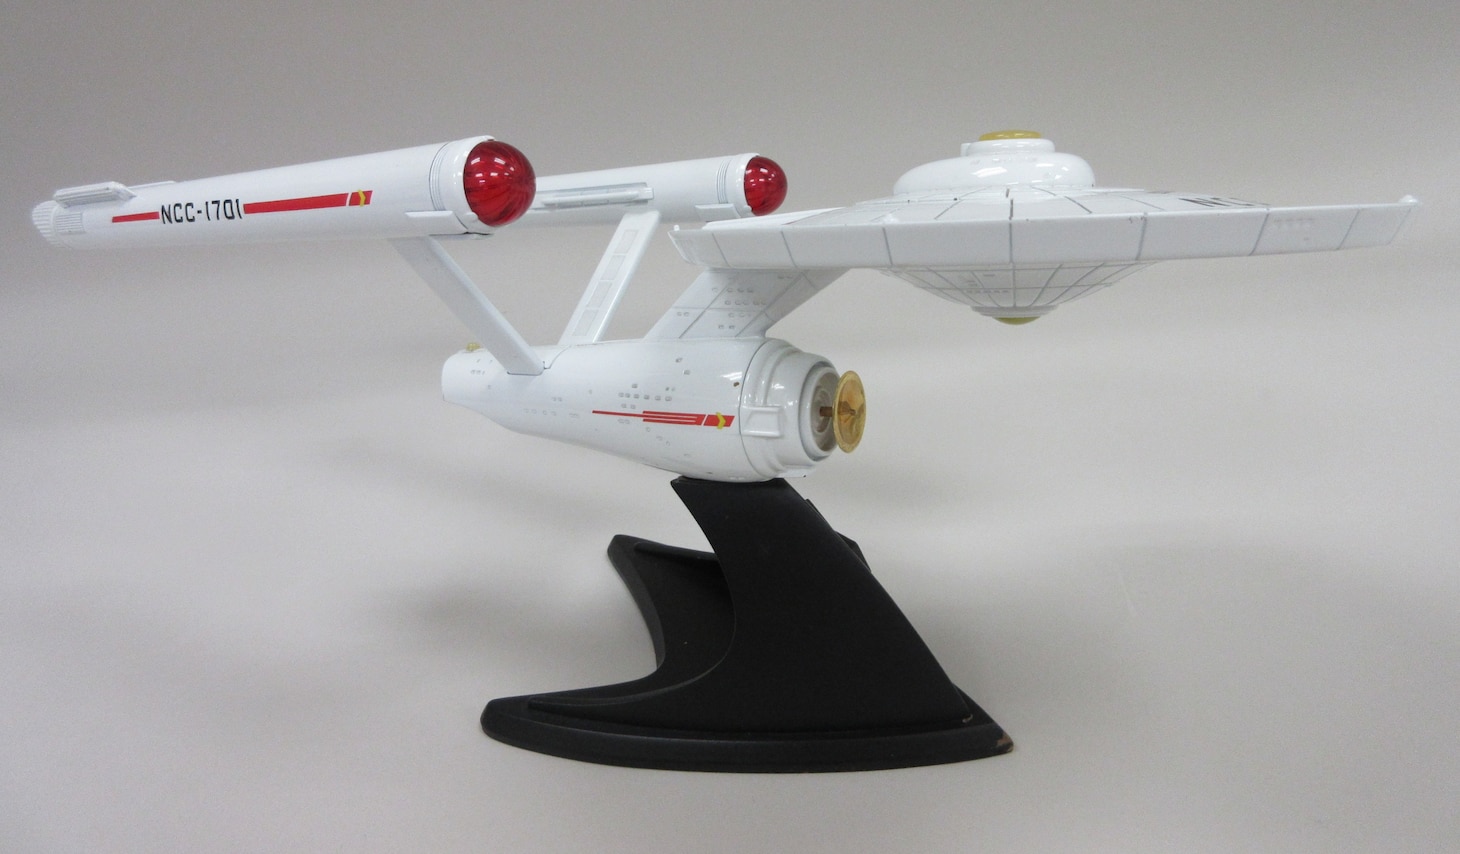 This ship model of Star Trek’s USS Enterprise (NCC-1701) was located aboard the United States Navy’s USS Enterprise (CVN-65) before being transferred to the Naval History and Heritage Command for preservation in 2006. Gene Roddenberry, the creator of Star Trek, wrote the premise for his space epic in 1964, just three years after the United States launched the nuclear-powered USS Enterprise (CVN-65), the most advanced aircraft carrier in the world at the time. Even Star Trek Art Director Matt Jefferies placed a drawing of the starship Enterprise next to that of the Navy aircraft carrier for scale. The Enterprise name has upheld its legacy for many decades within the Star Trek franchise. Naval History and Heritage Command Image.